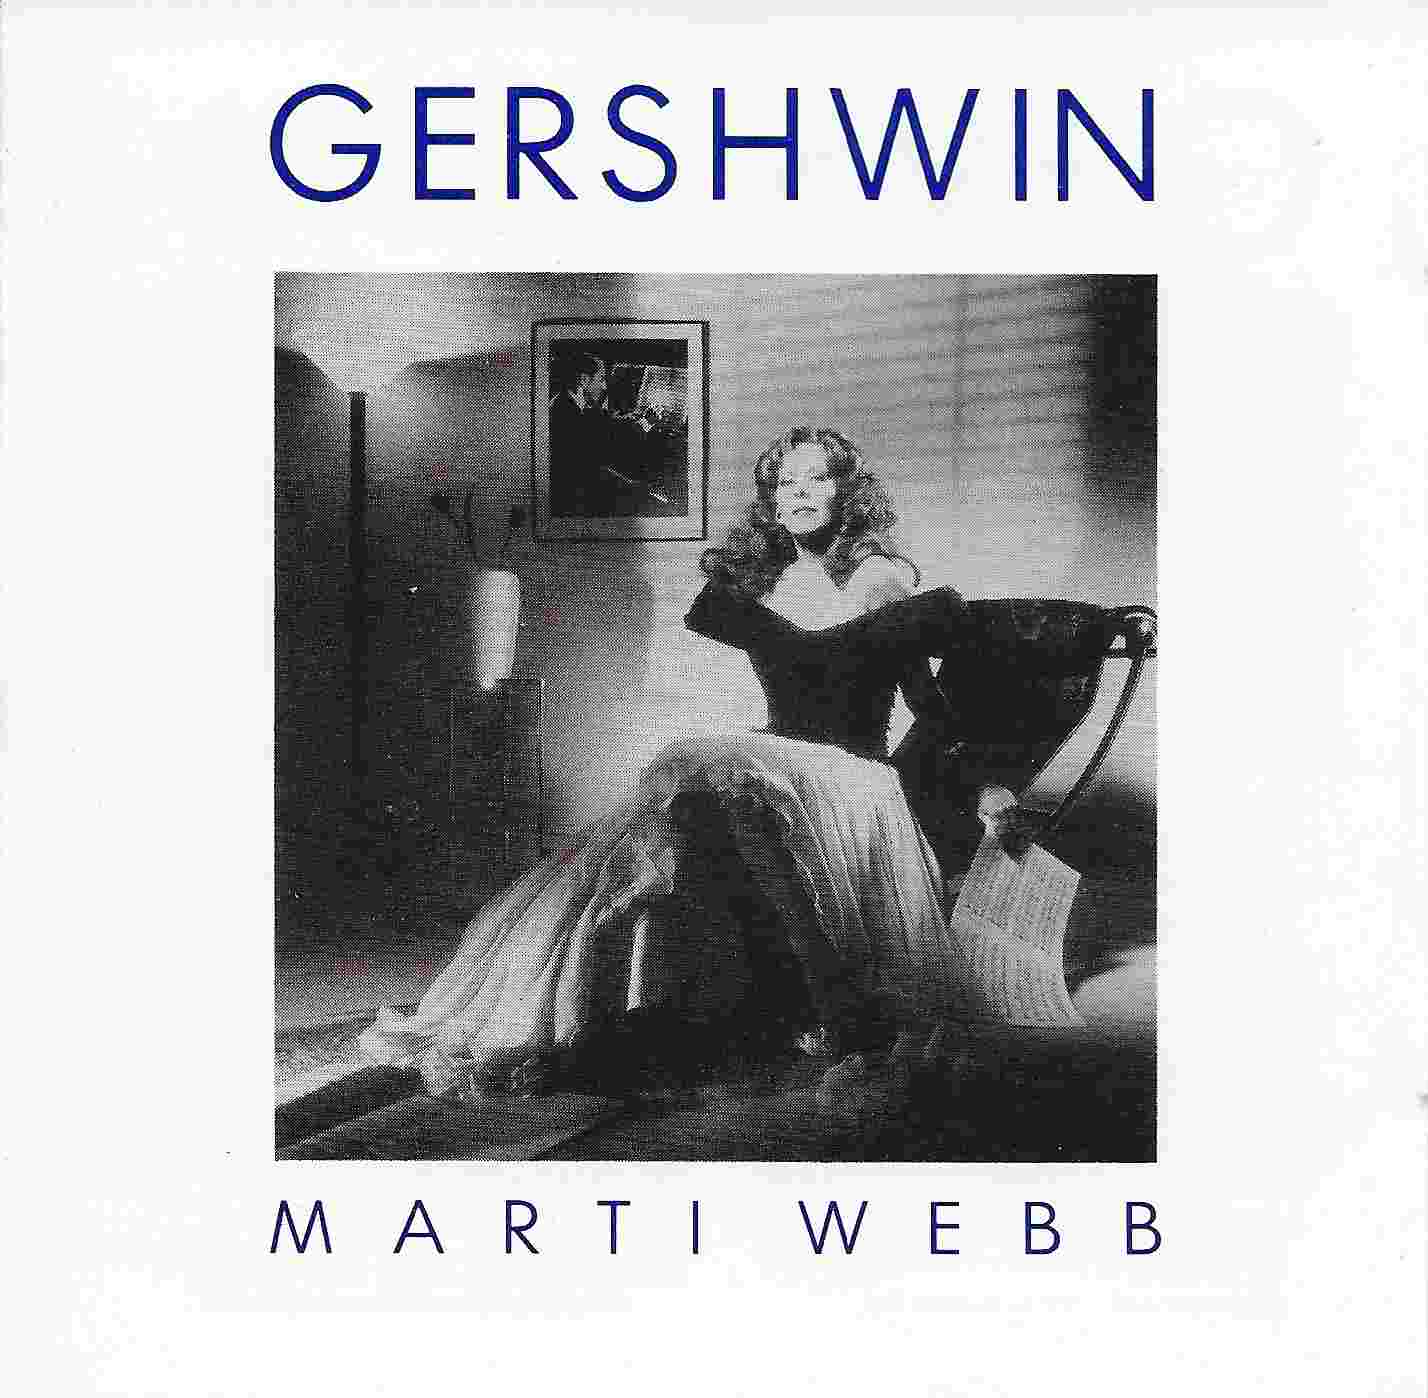 Picture of BBCCD640 Gershwin - Marti Webb by artist Marti Webb from the BBC cds - Records and Tapes library